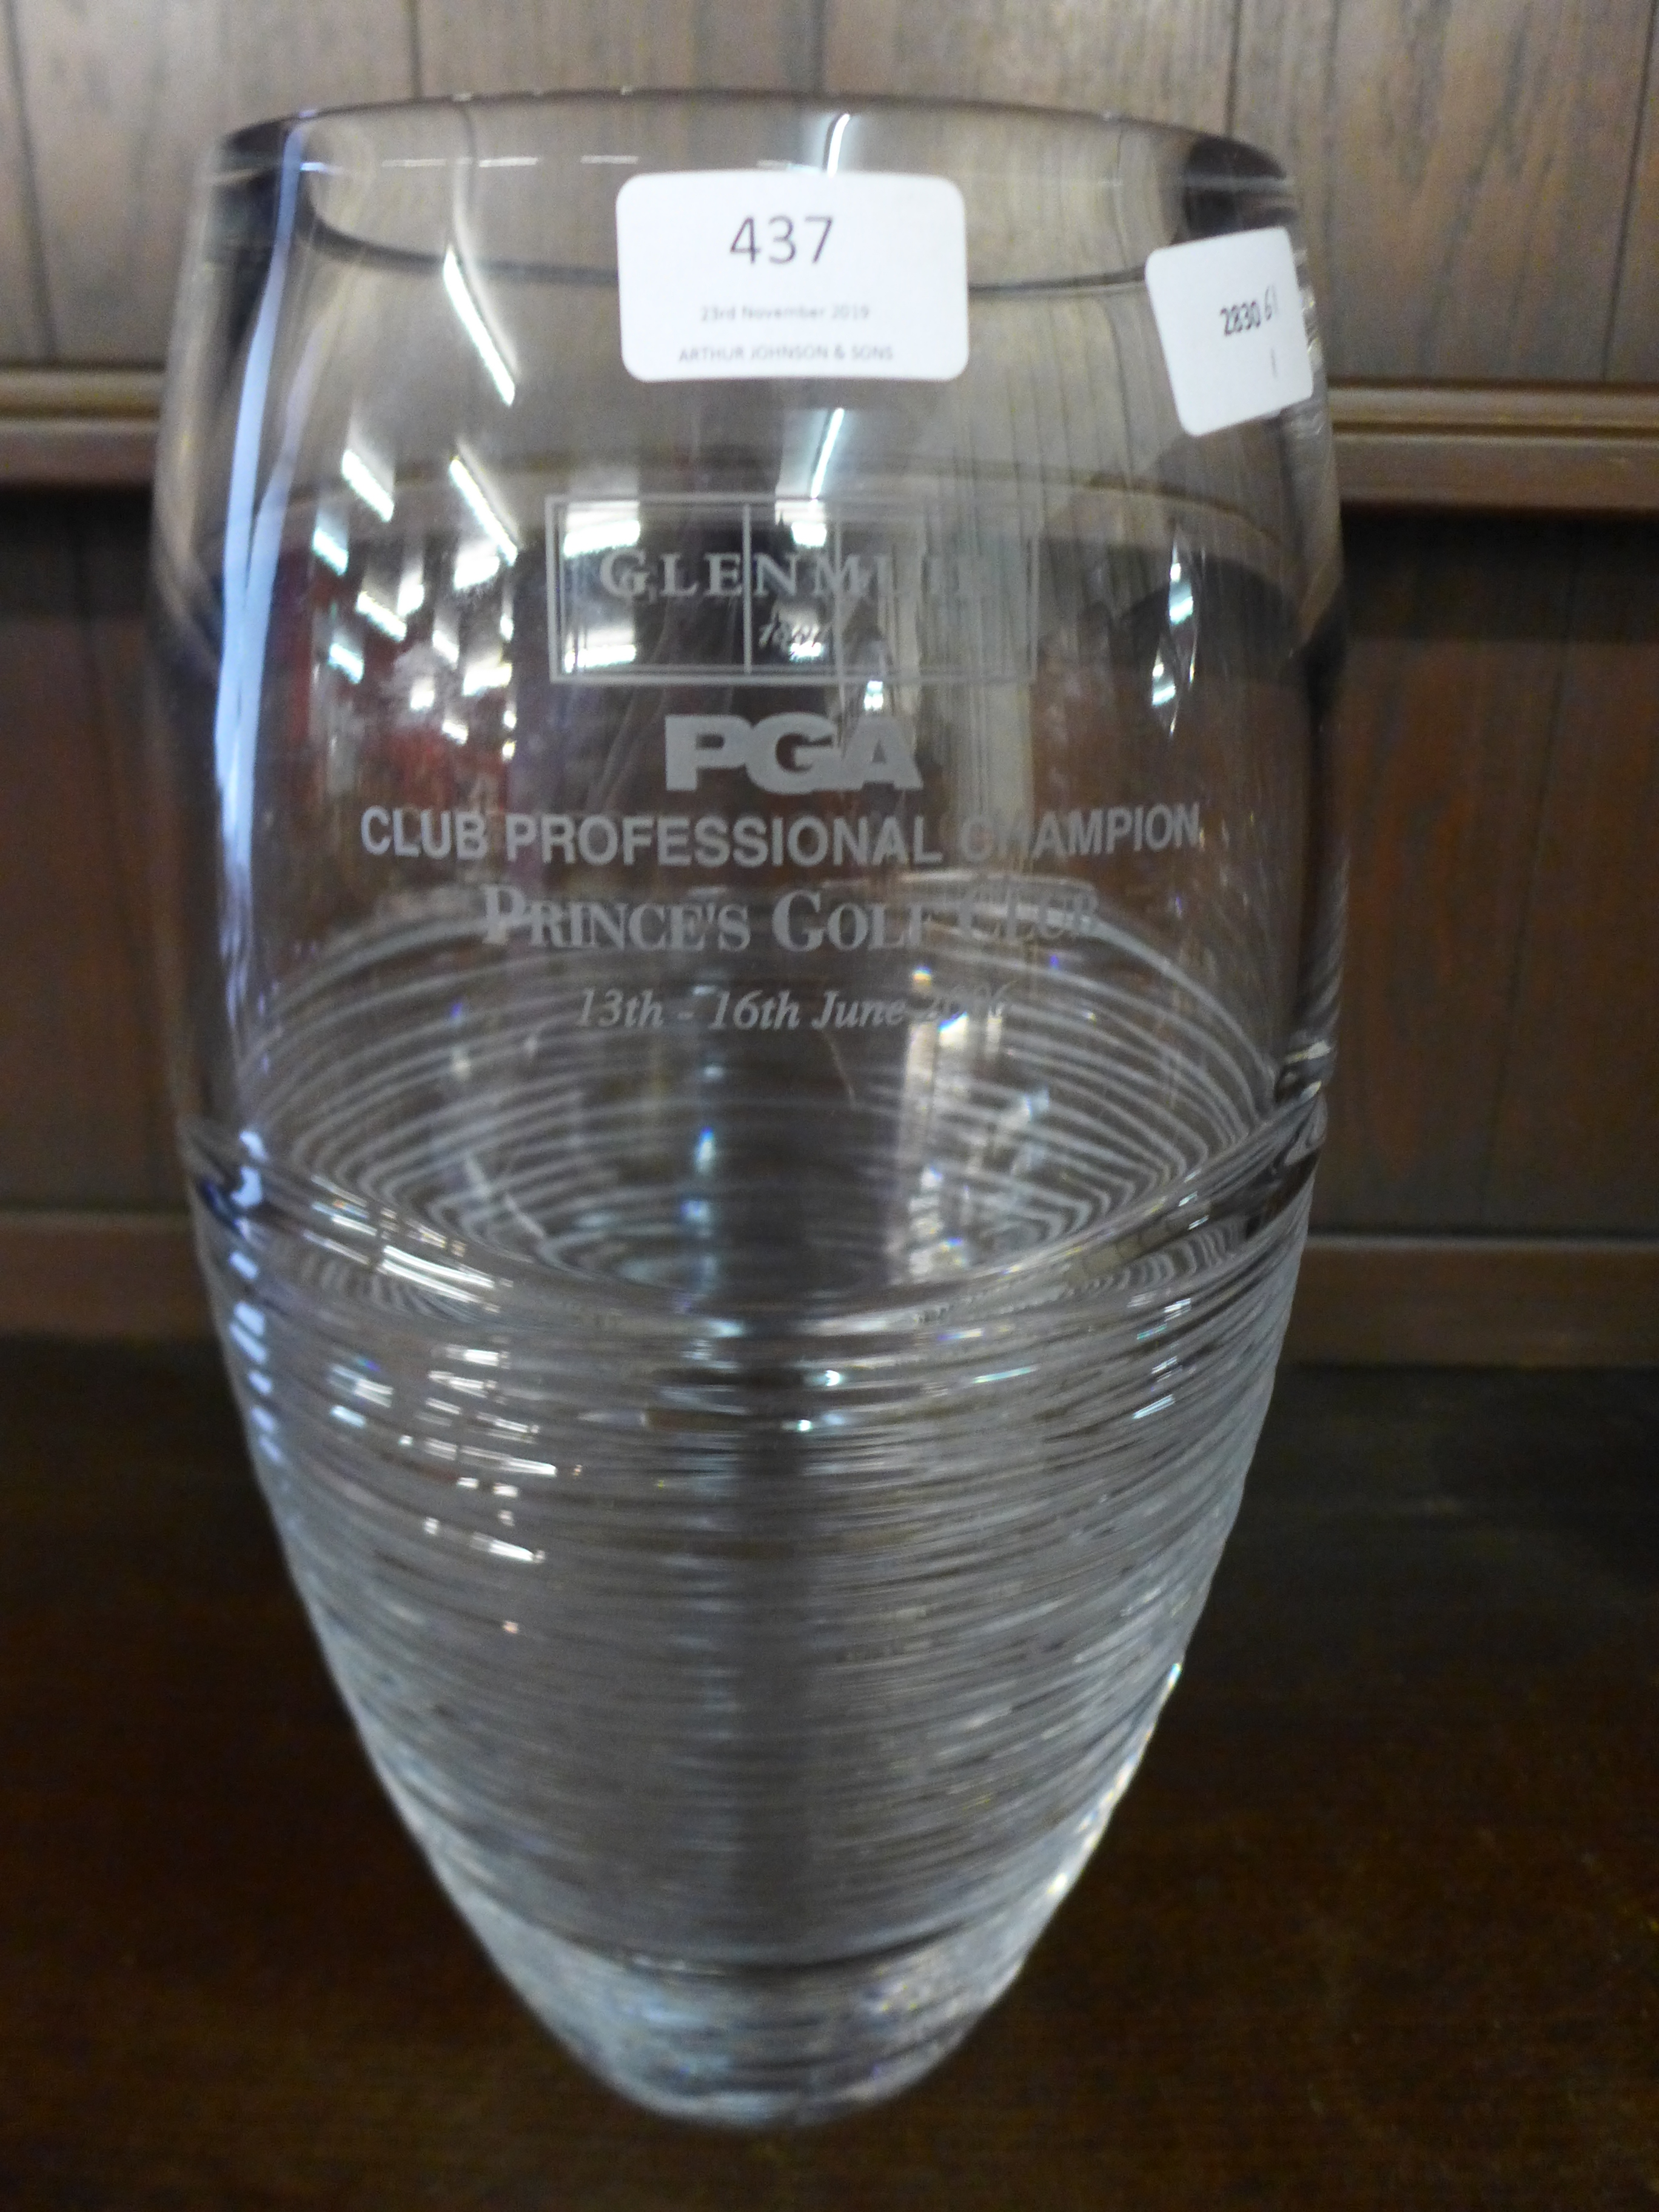 A Waterford Crystal glass vase for PGA Prince's Golf Club, 13-16 June 2006,